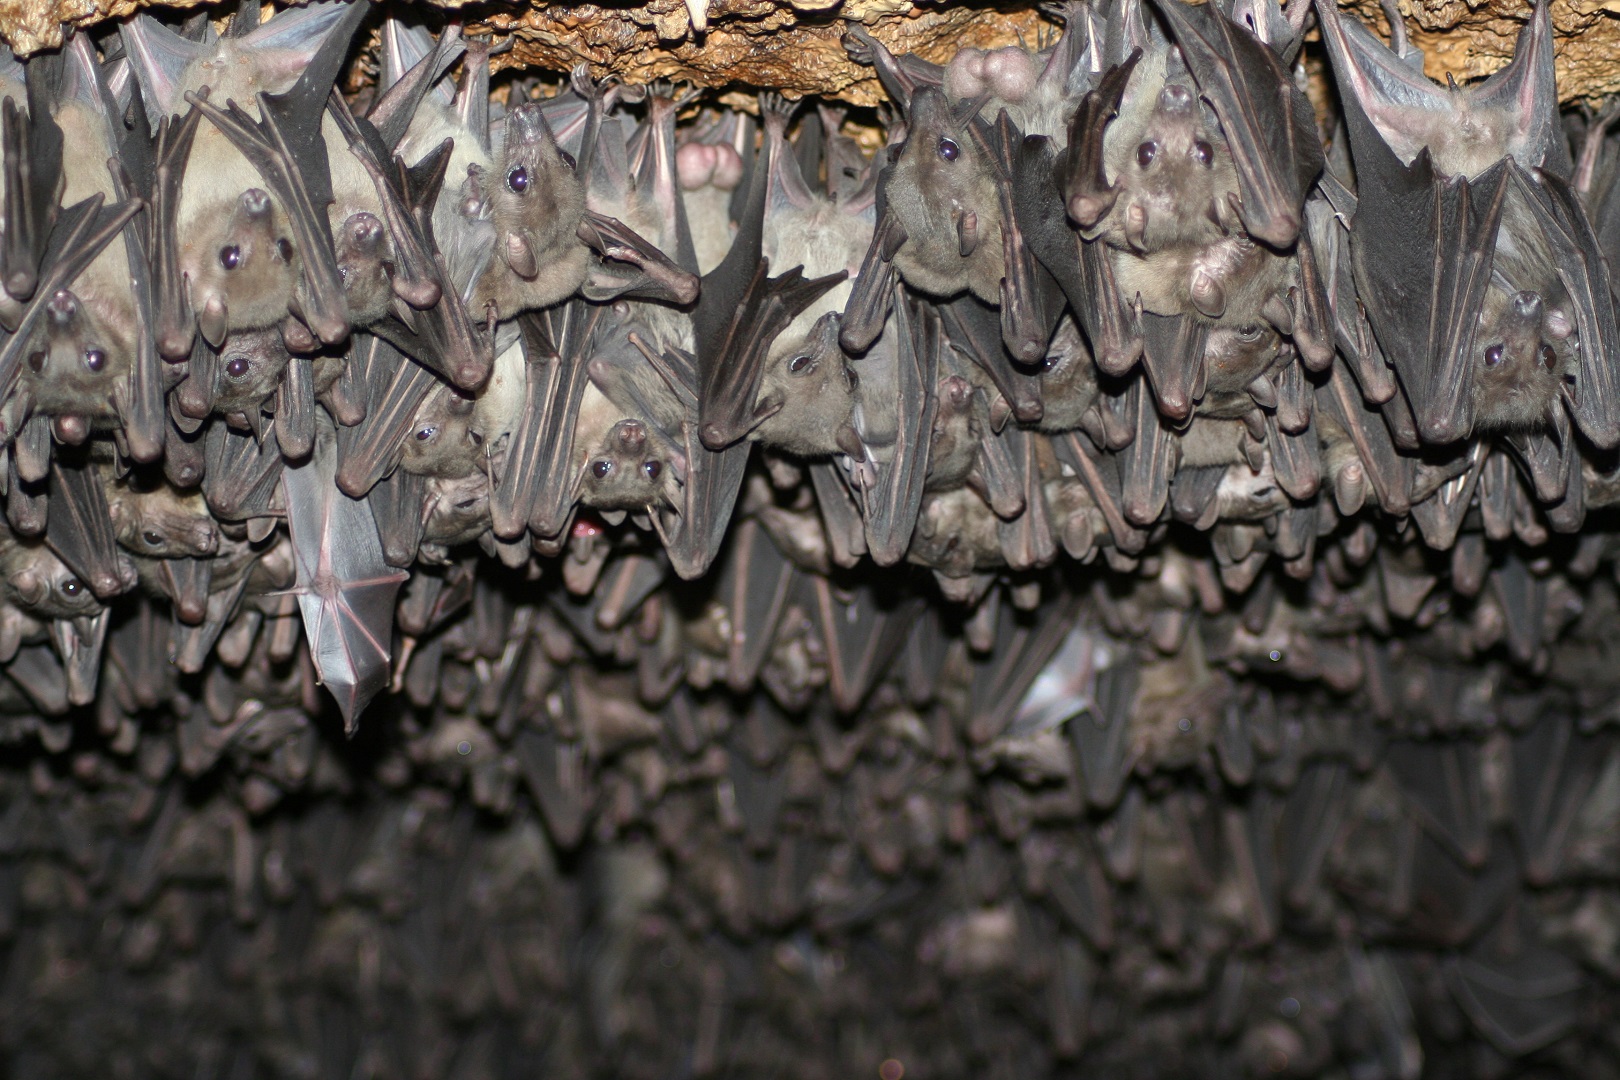 Views of bats in the bat cave in Maramagambo forest, Queen Elizabeth National Park